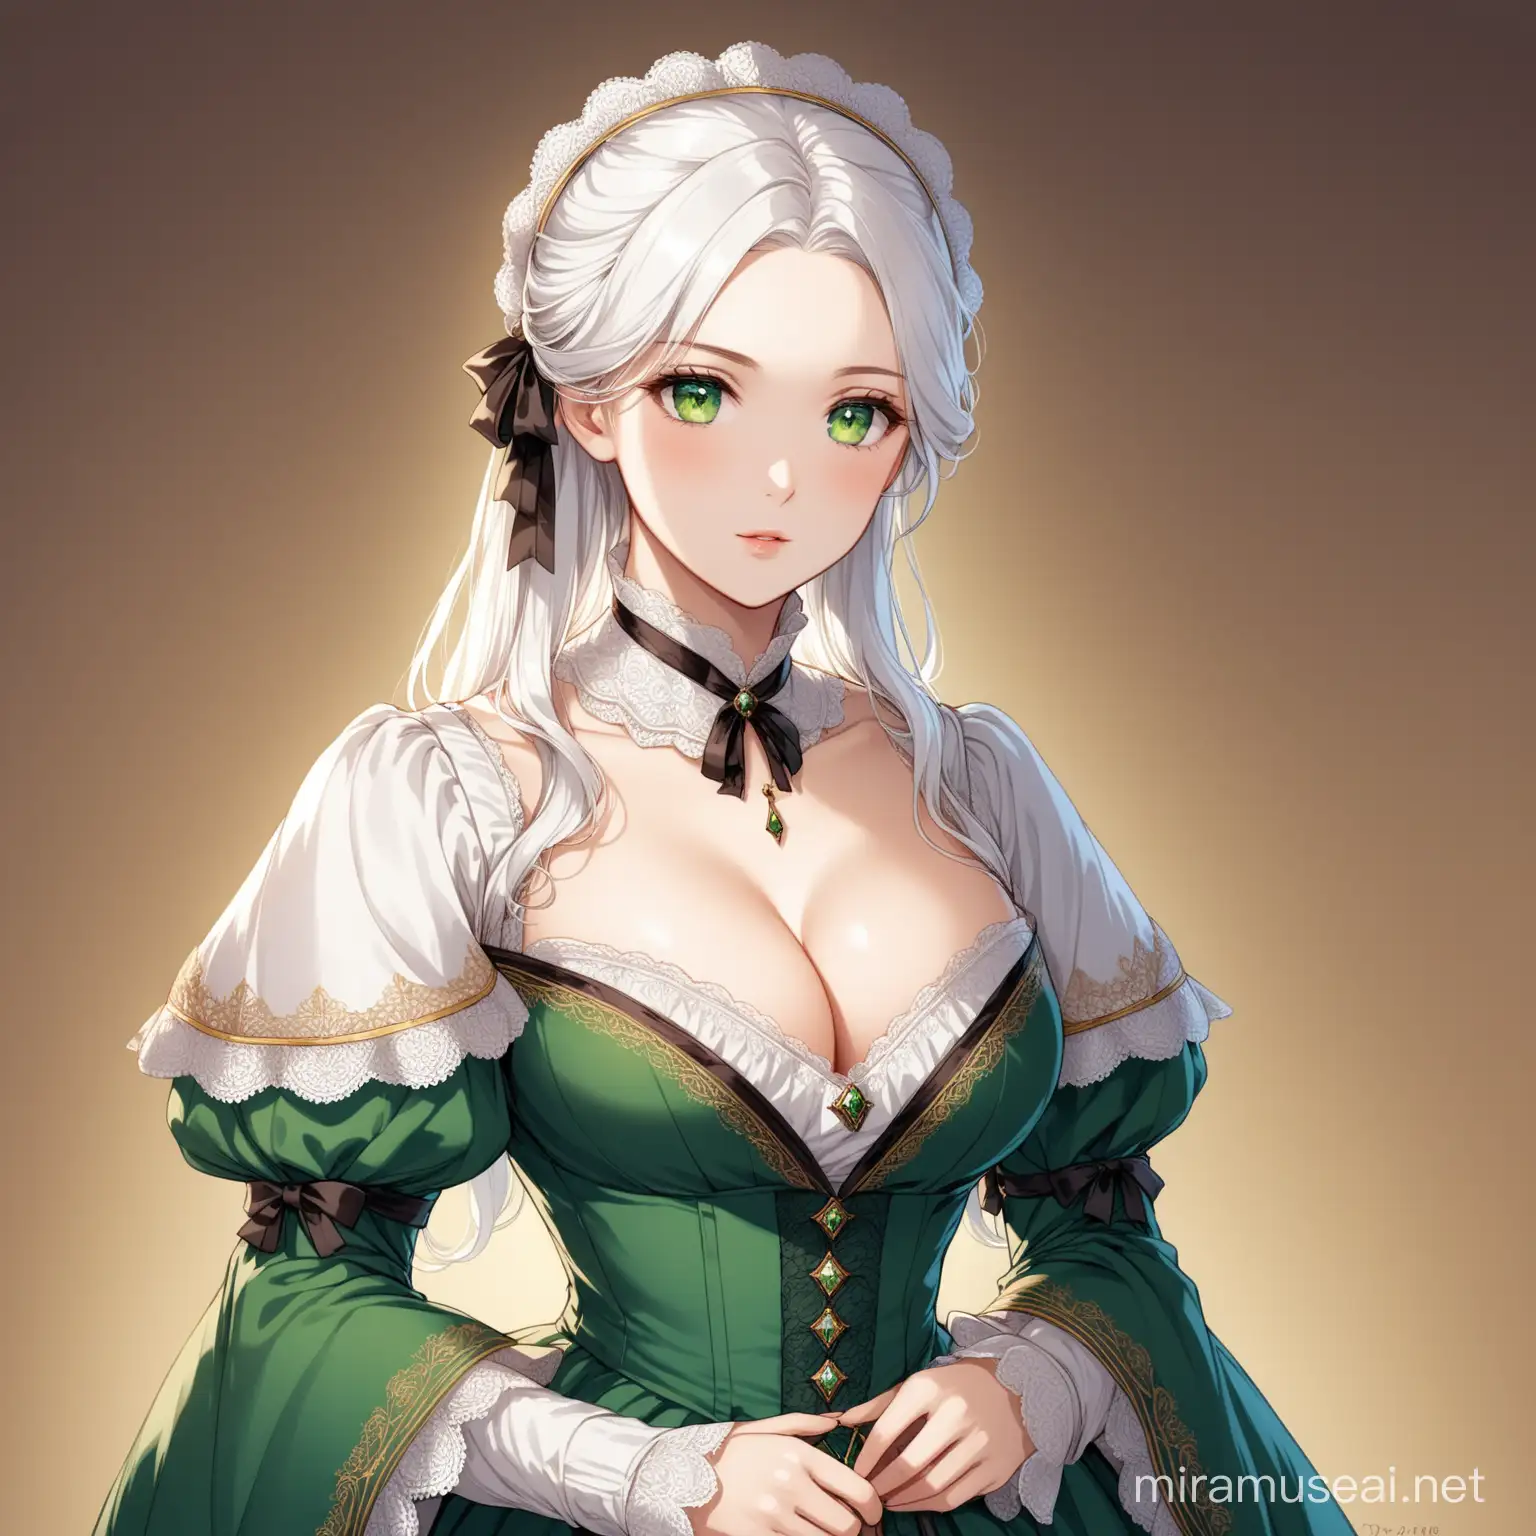 young woman, white hair, green eyes, noble, victorian dress, big chest, cleavage, victorian age